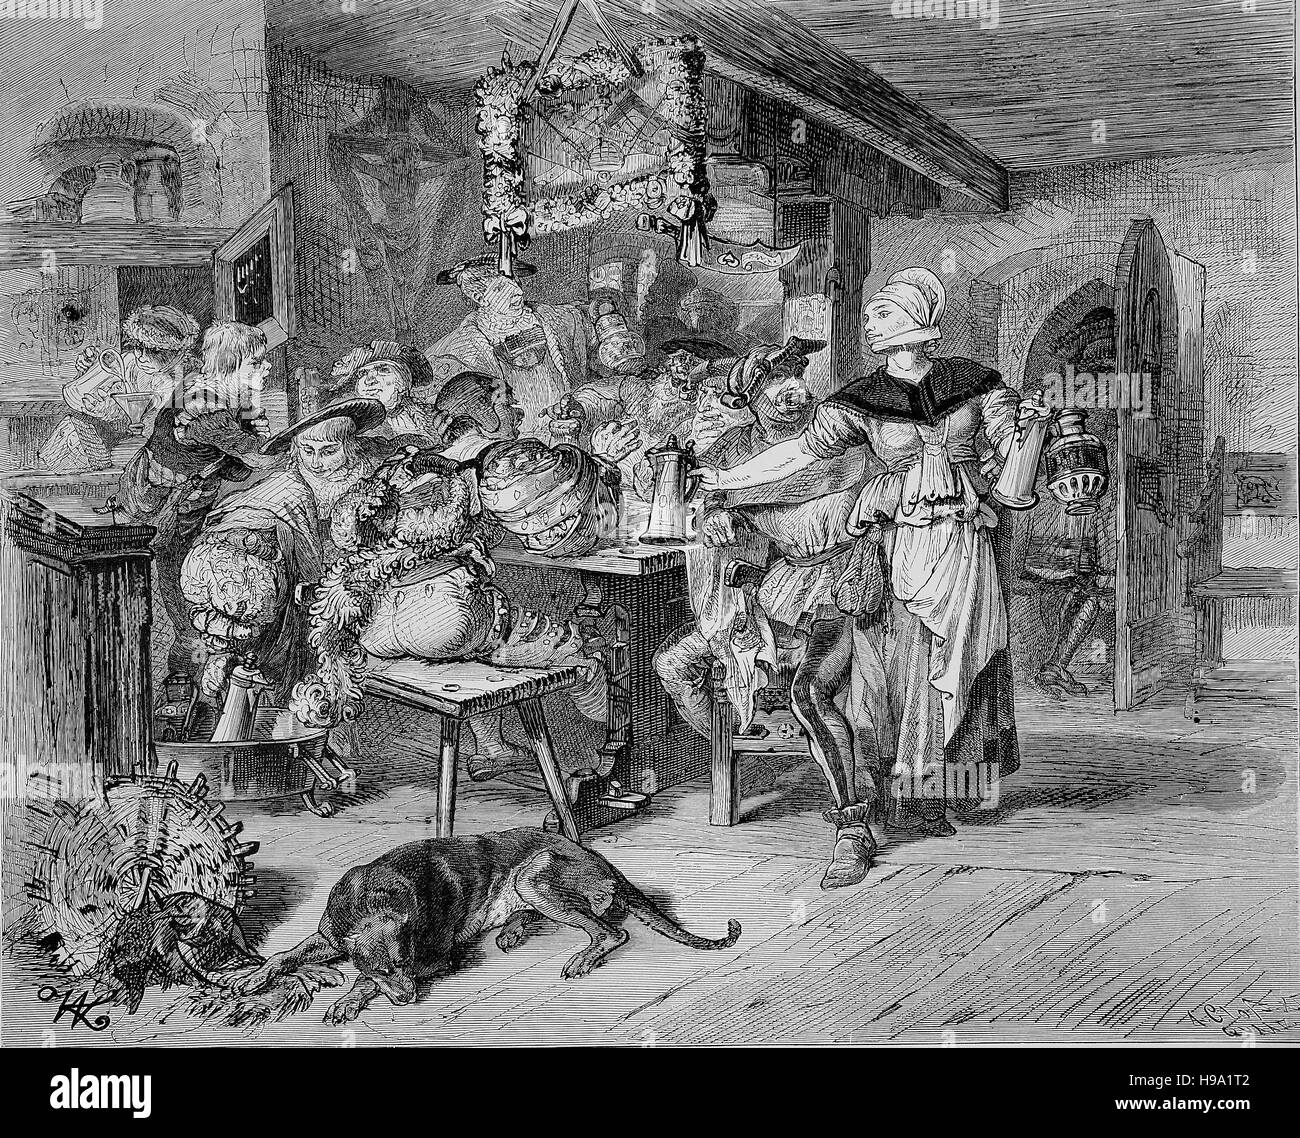 boozer, Landsknechte drinking in an inn in the Middle Ages, historical illustration Stock Photo